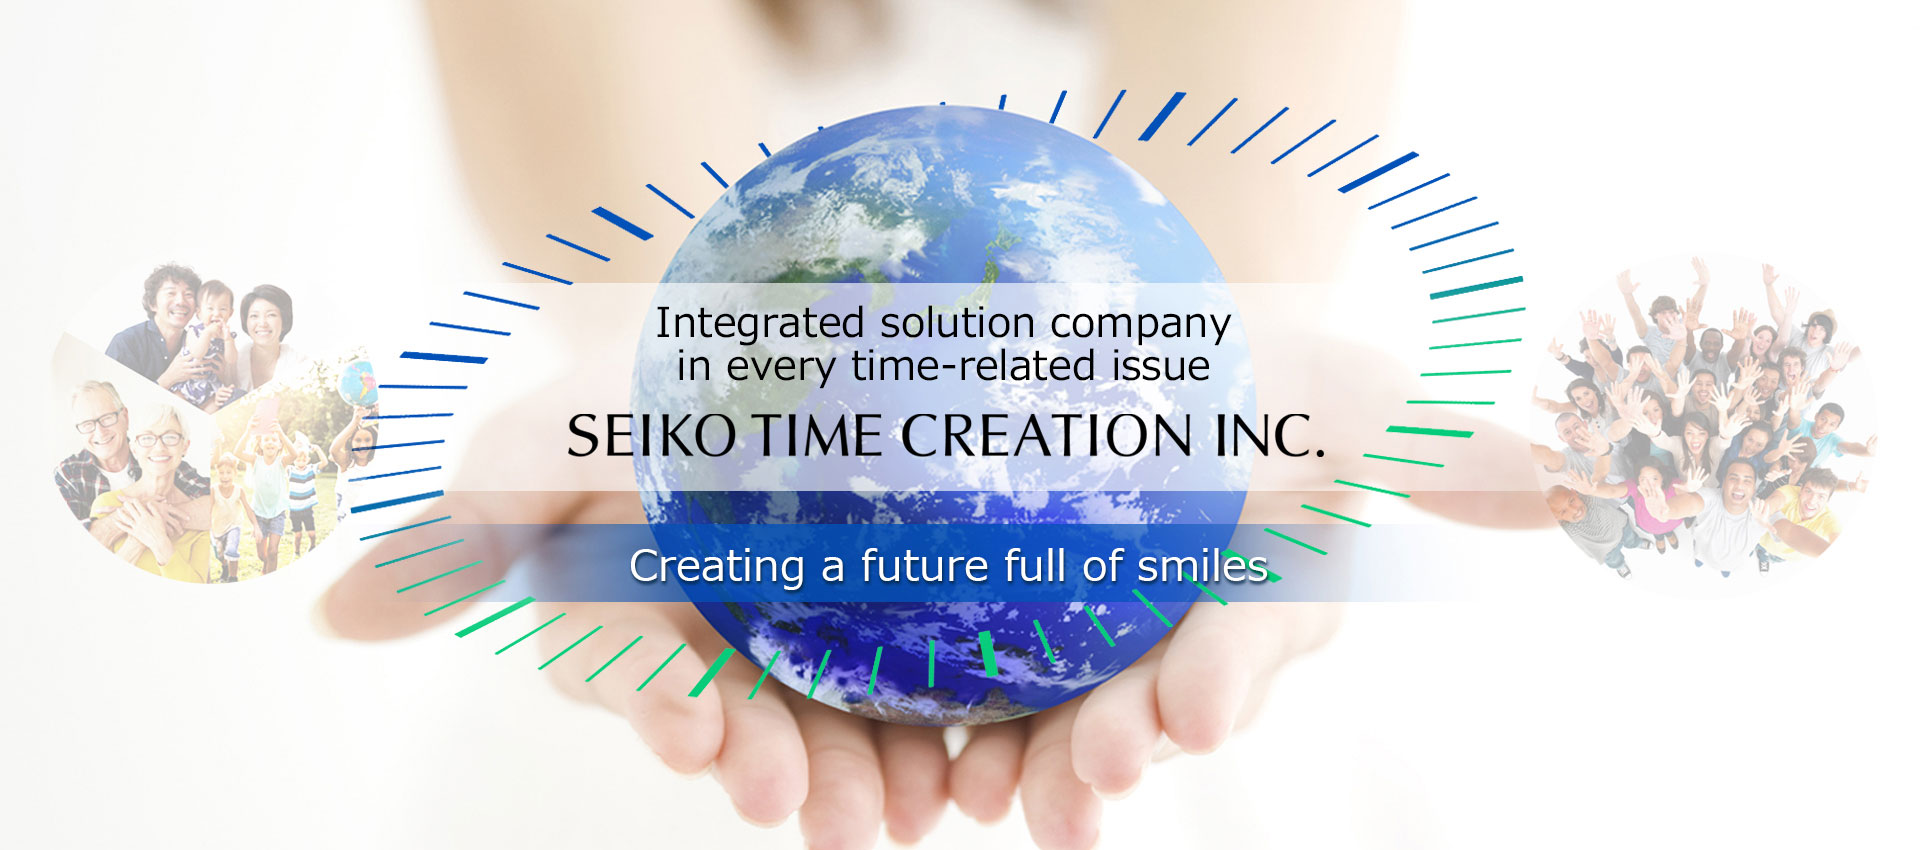 Integrated solution company in every time-related issue SEIKO TIME CREATION INC. Creating a future full of smiles